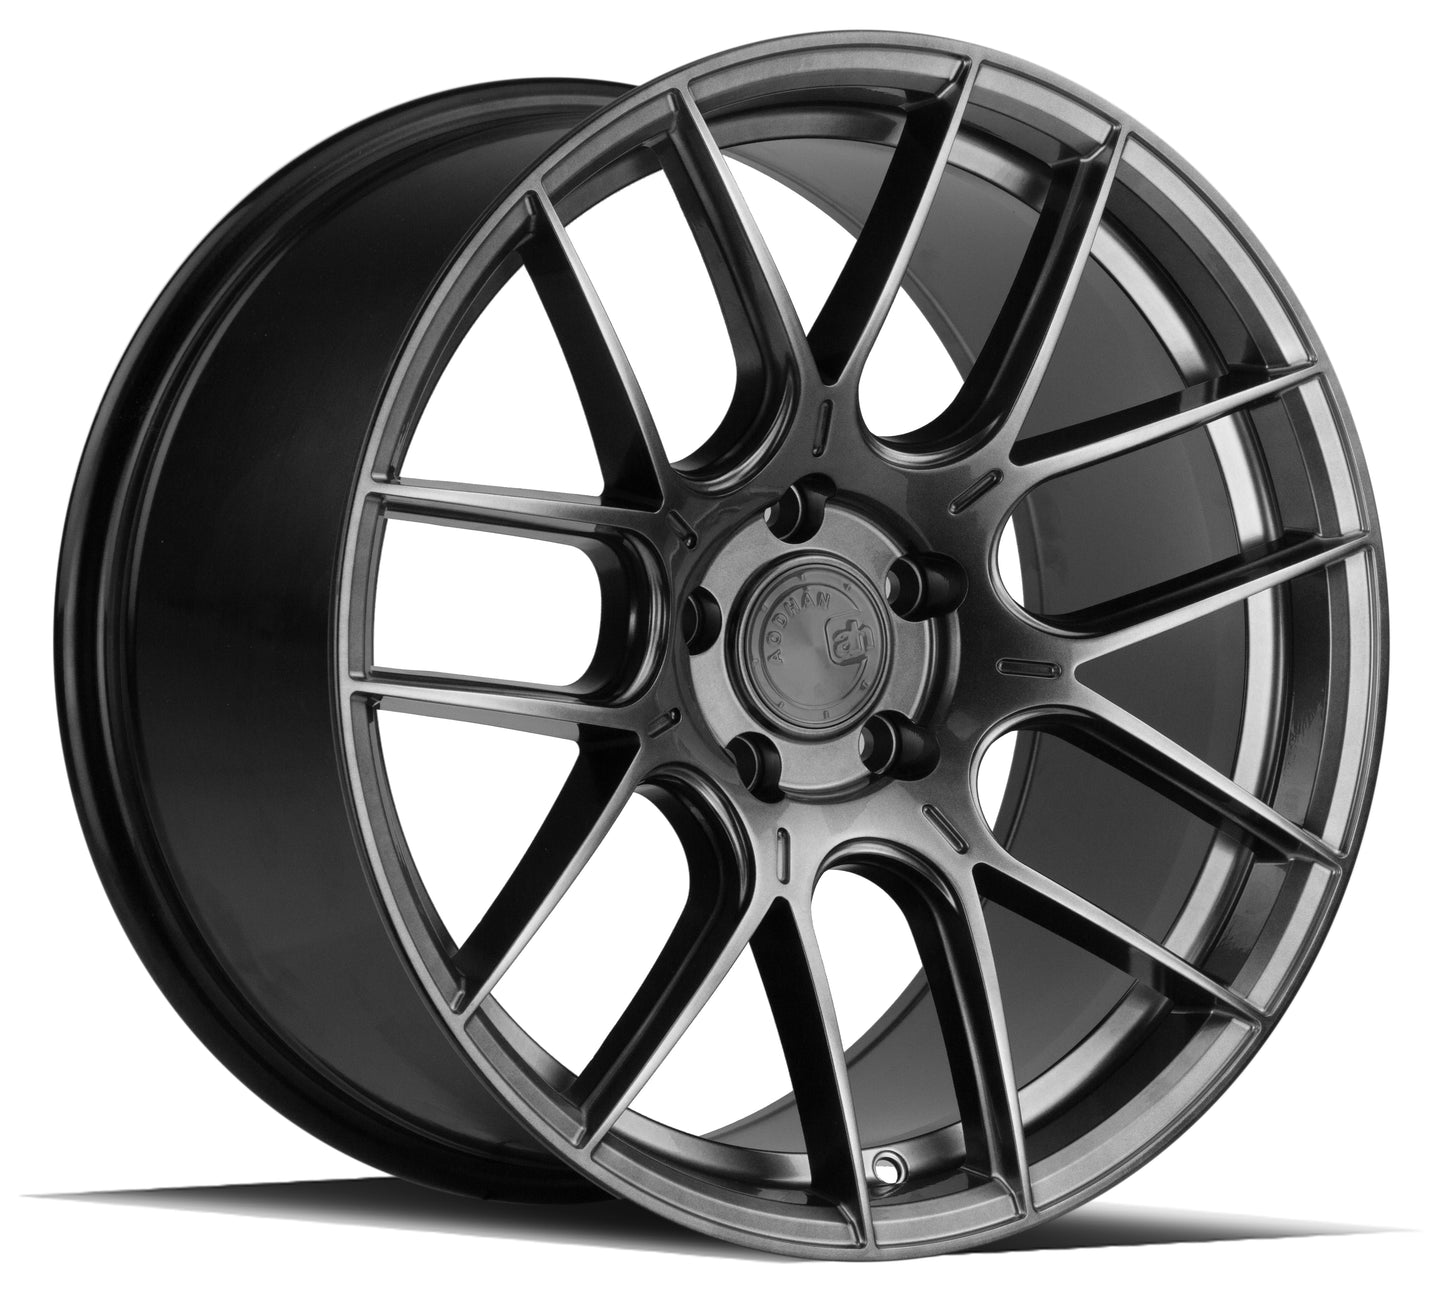 18" Aodhan AHX Hyper Black 5x120 ( Staggered Setup ) ( Set of 4 )